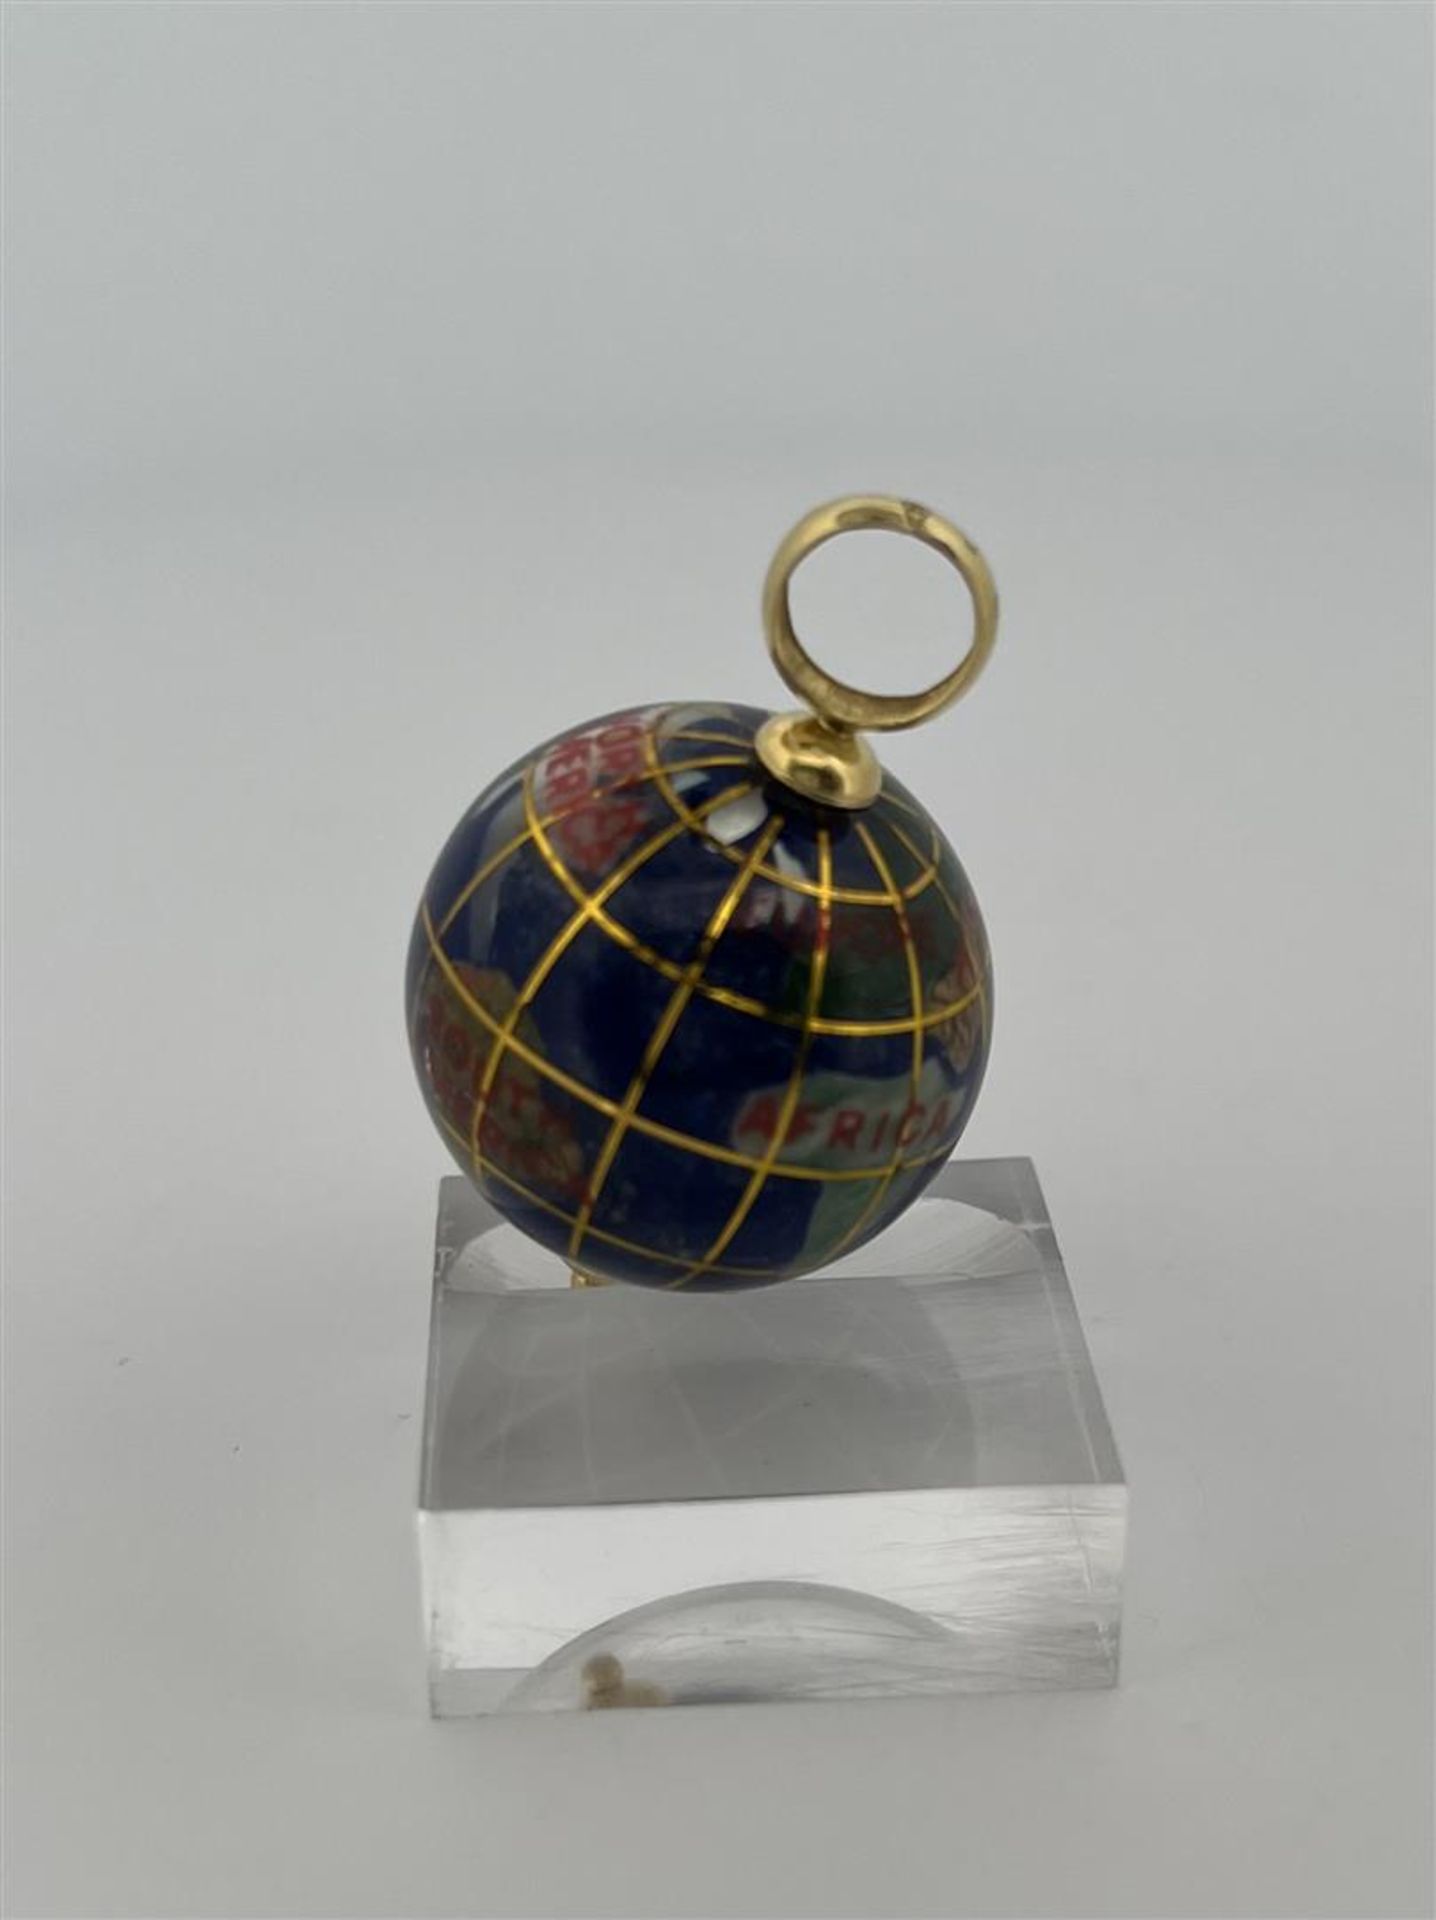 18kt yellow gold globe pendant inlaid with enamel and gemstones.
The globe also has a name for each 